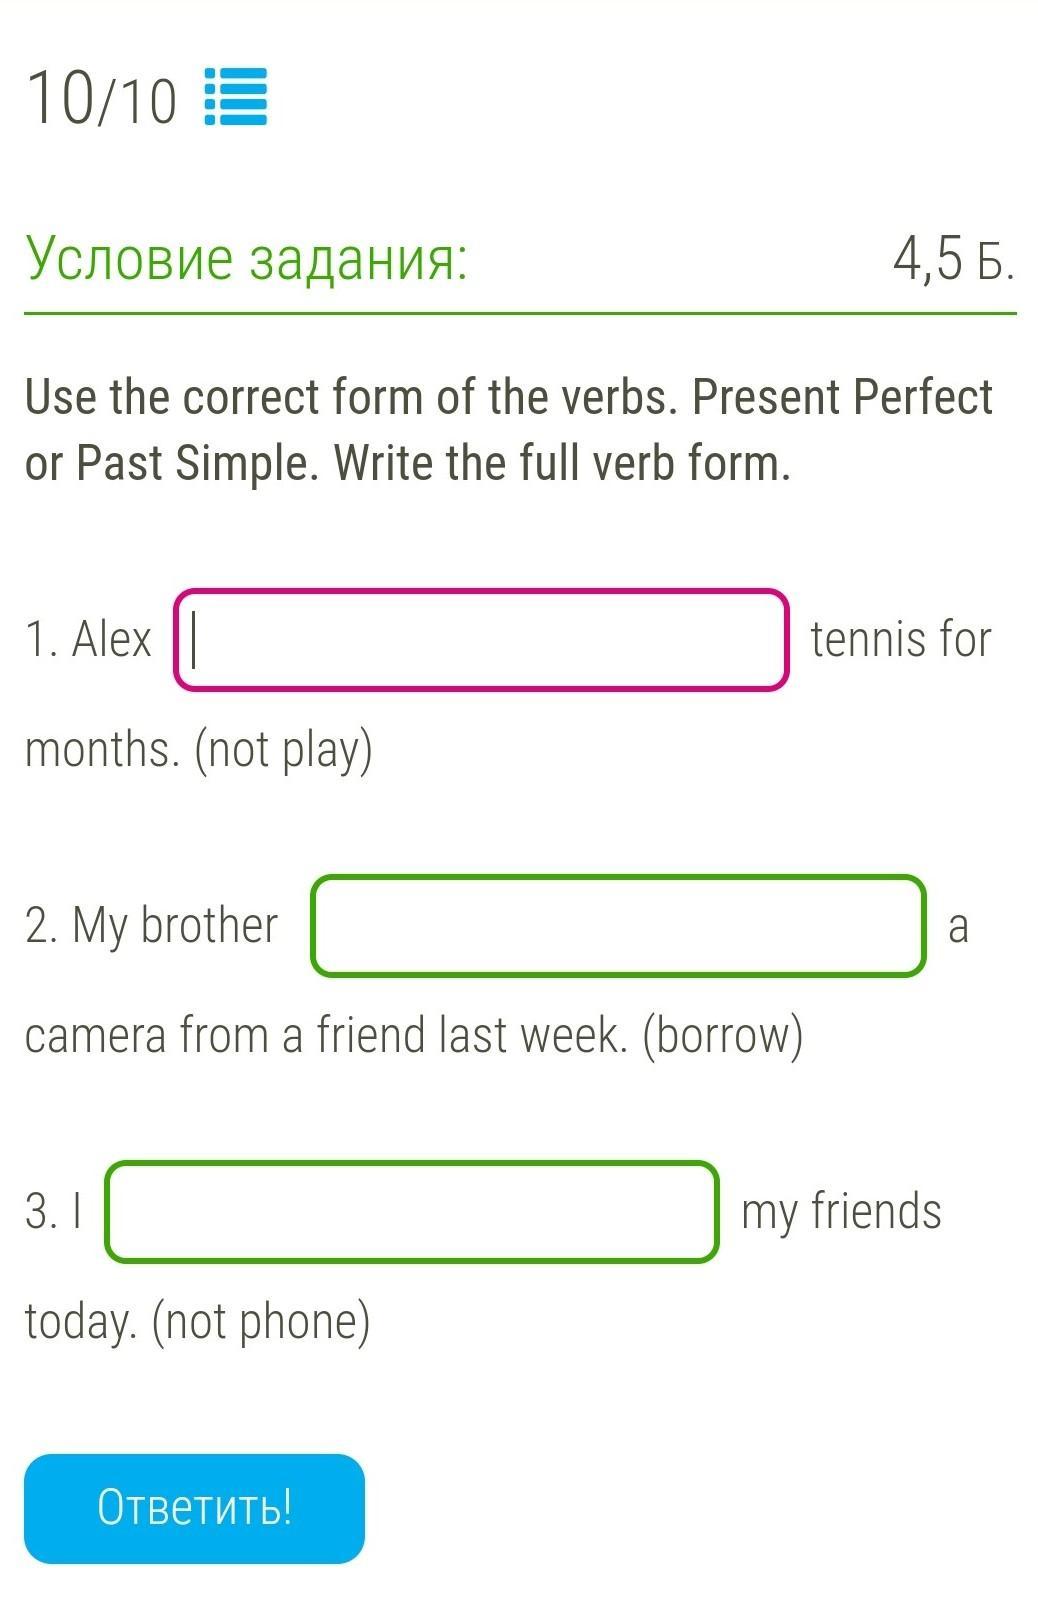 Past simple choose the correct verb form. Past perfect. Verb forms. Present simple correct form of the verb. Write the correct past form of the verbs. Write the Full verb form.